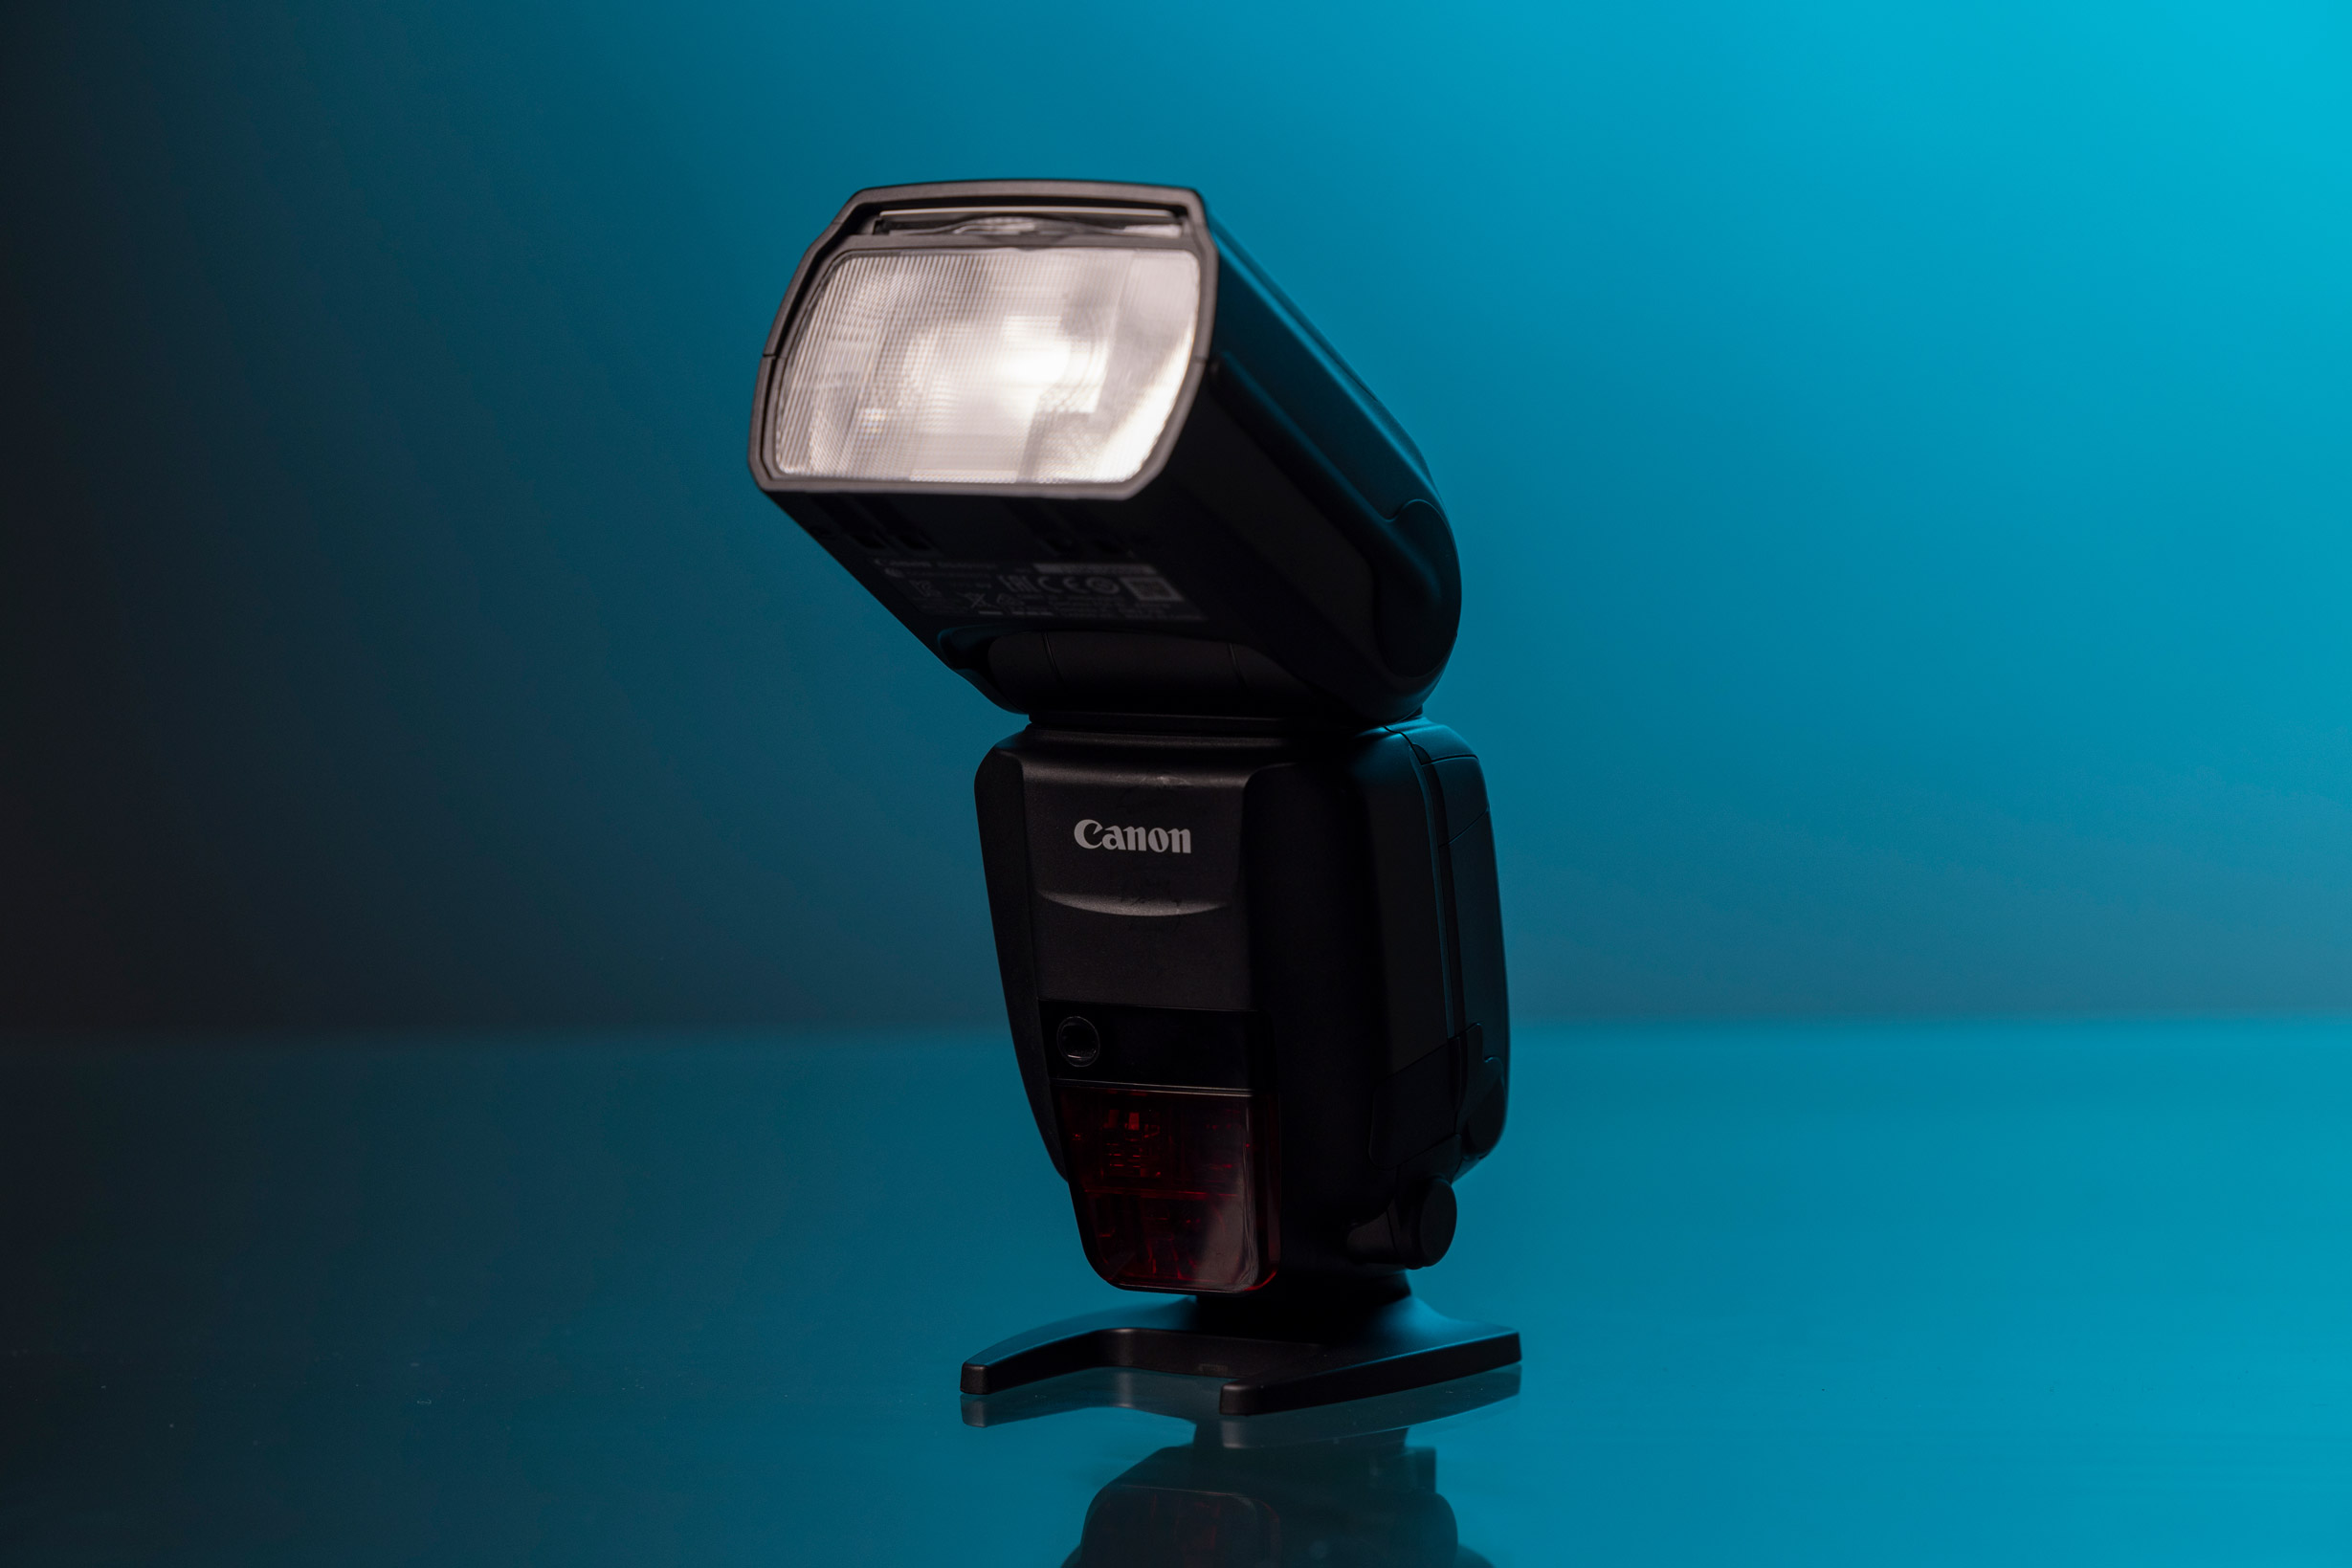 Choosing the Best Canon Speedlite Flash for Your Needs